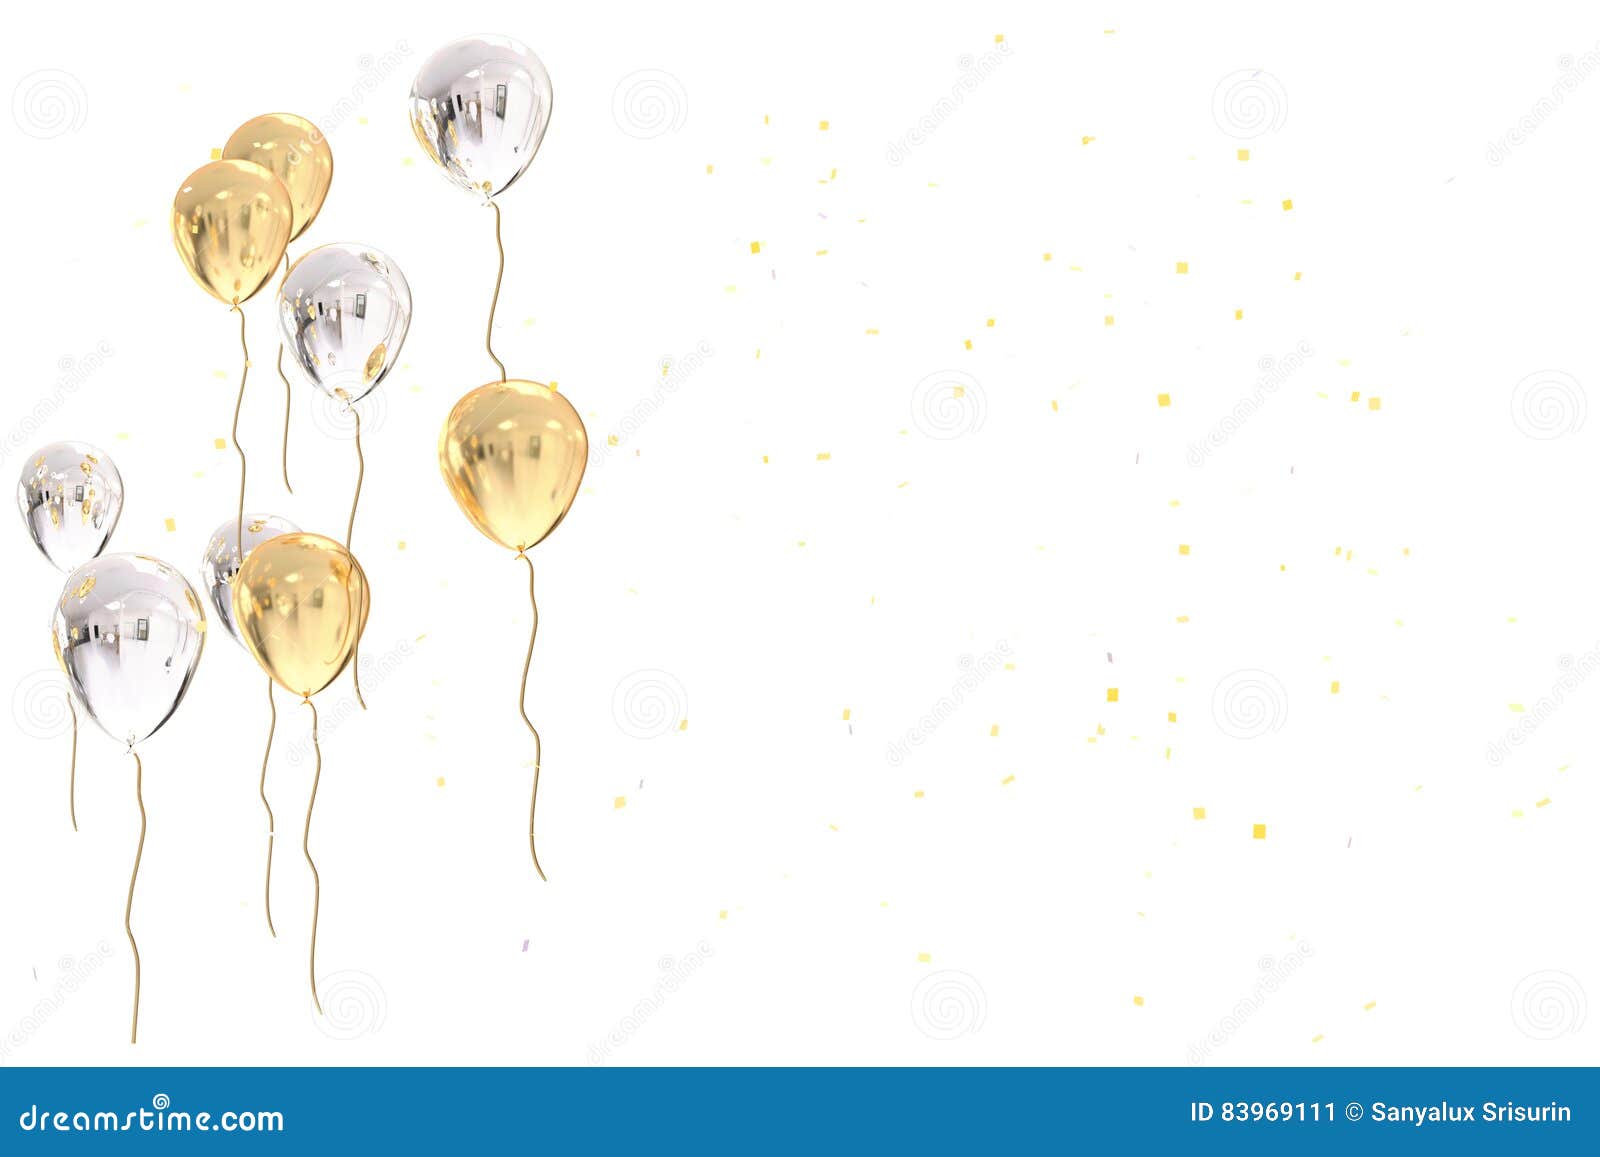 3D rendering of white, silver and golden balloons on white background with glitter